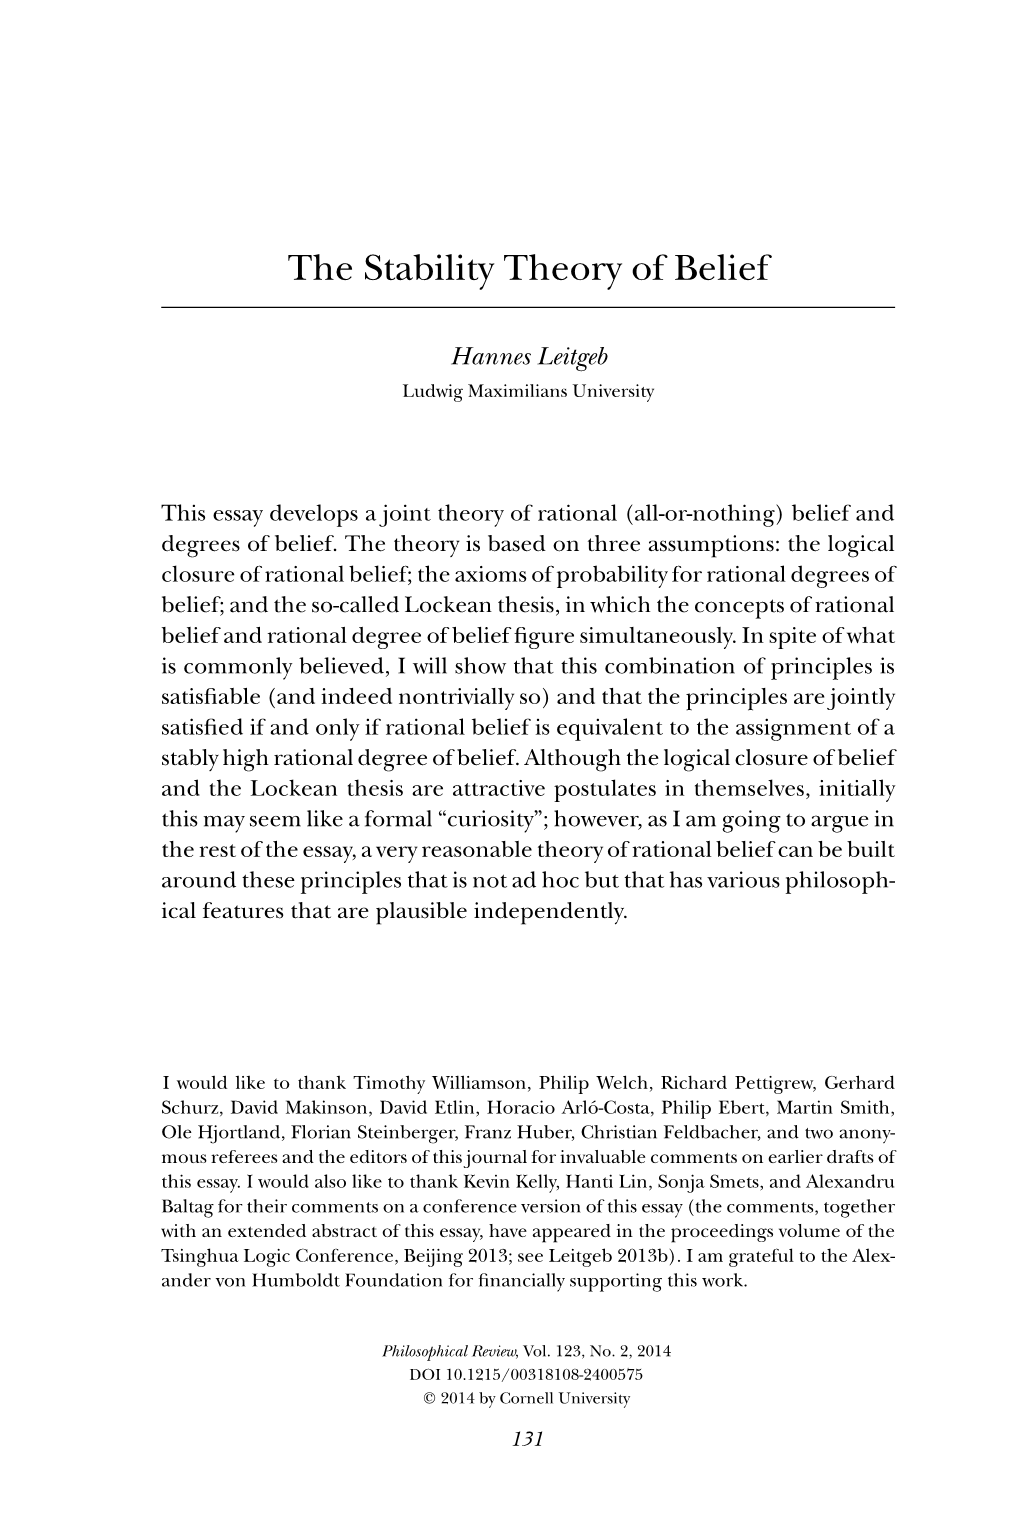 The Stability Theory of Belief